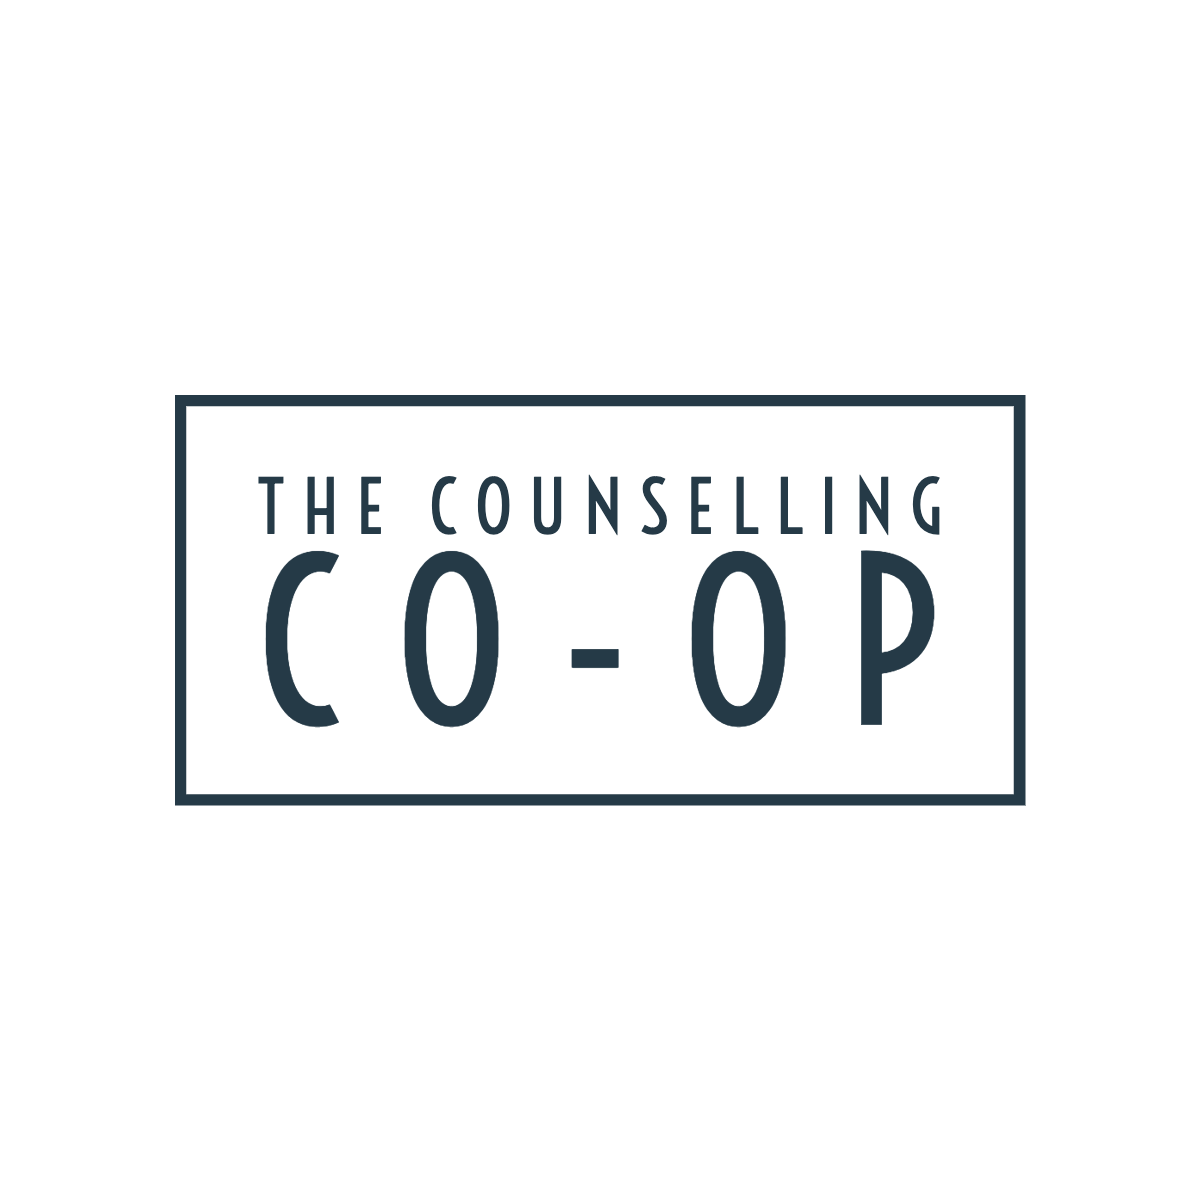 The Counselling Co-op